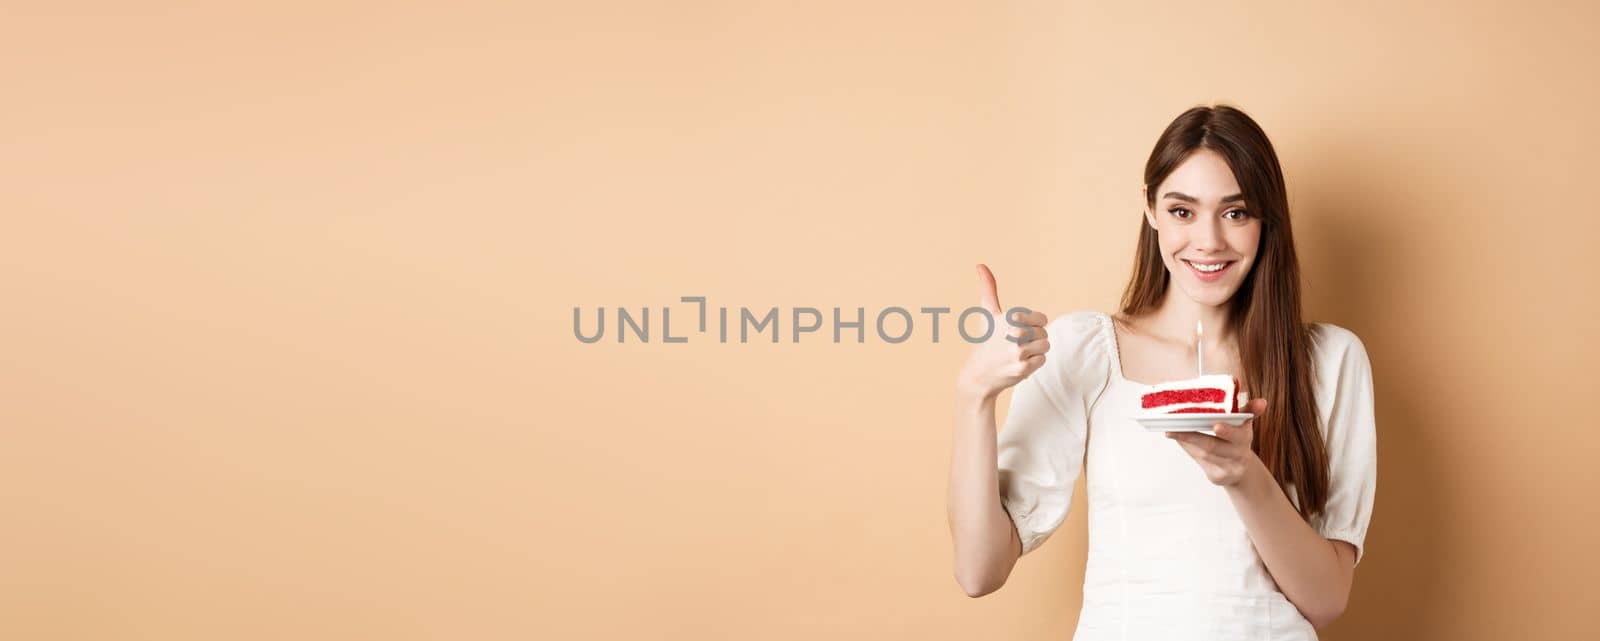 Beautiful birthday girl making wish on cake, showing thumb up and smiling happy, enjoying b-day party, standing on beige background.